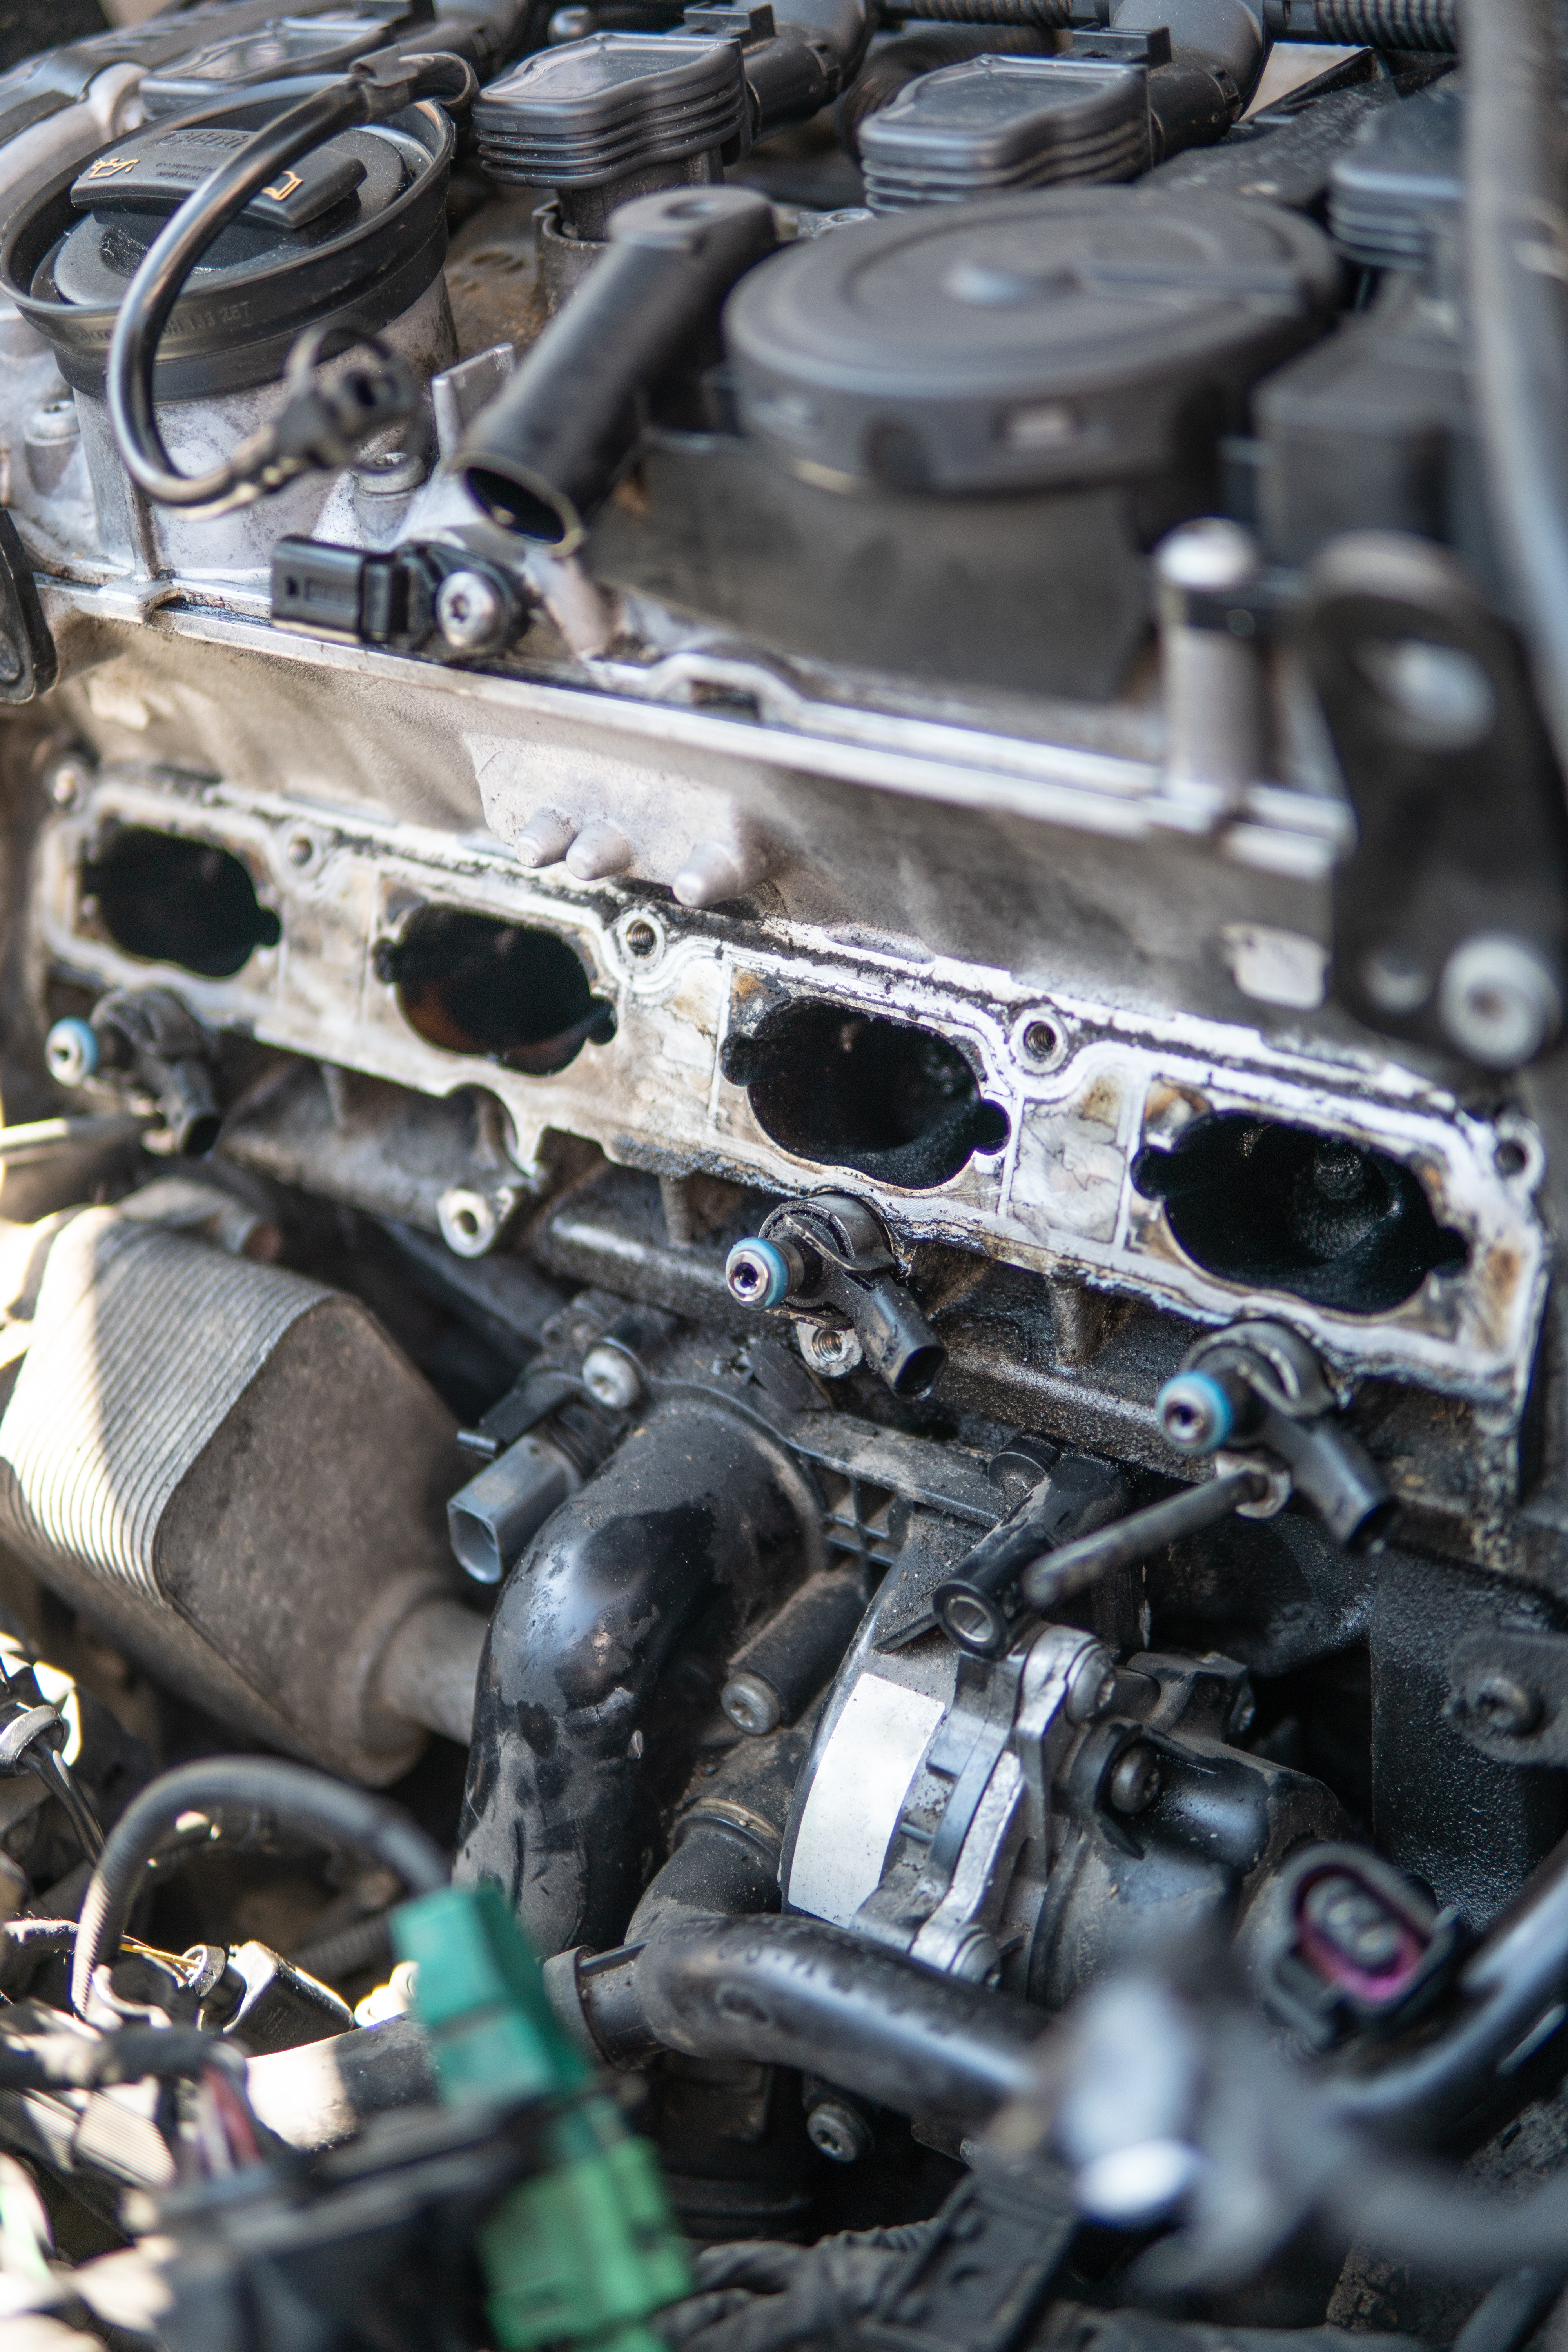 An image of a dirty intake manifold but DPF Alternatives can help with our expert intake manifold cleaning service in West Virginia & Tri-State.